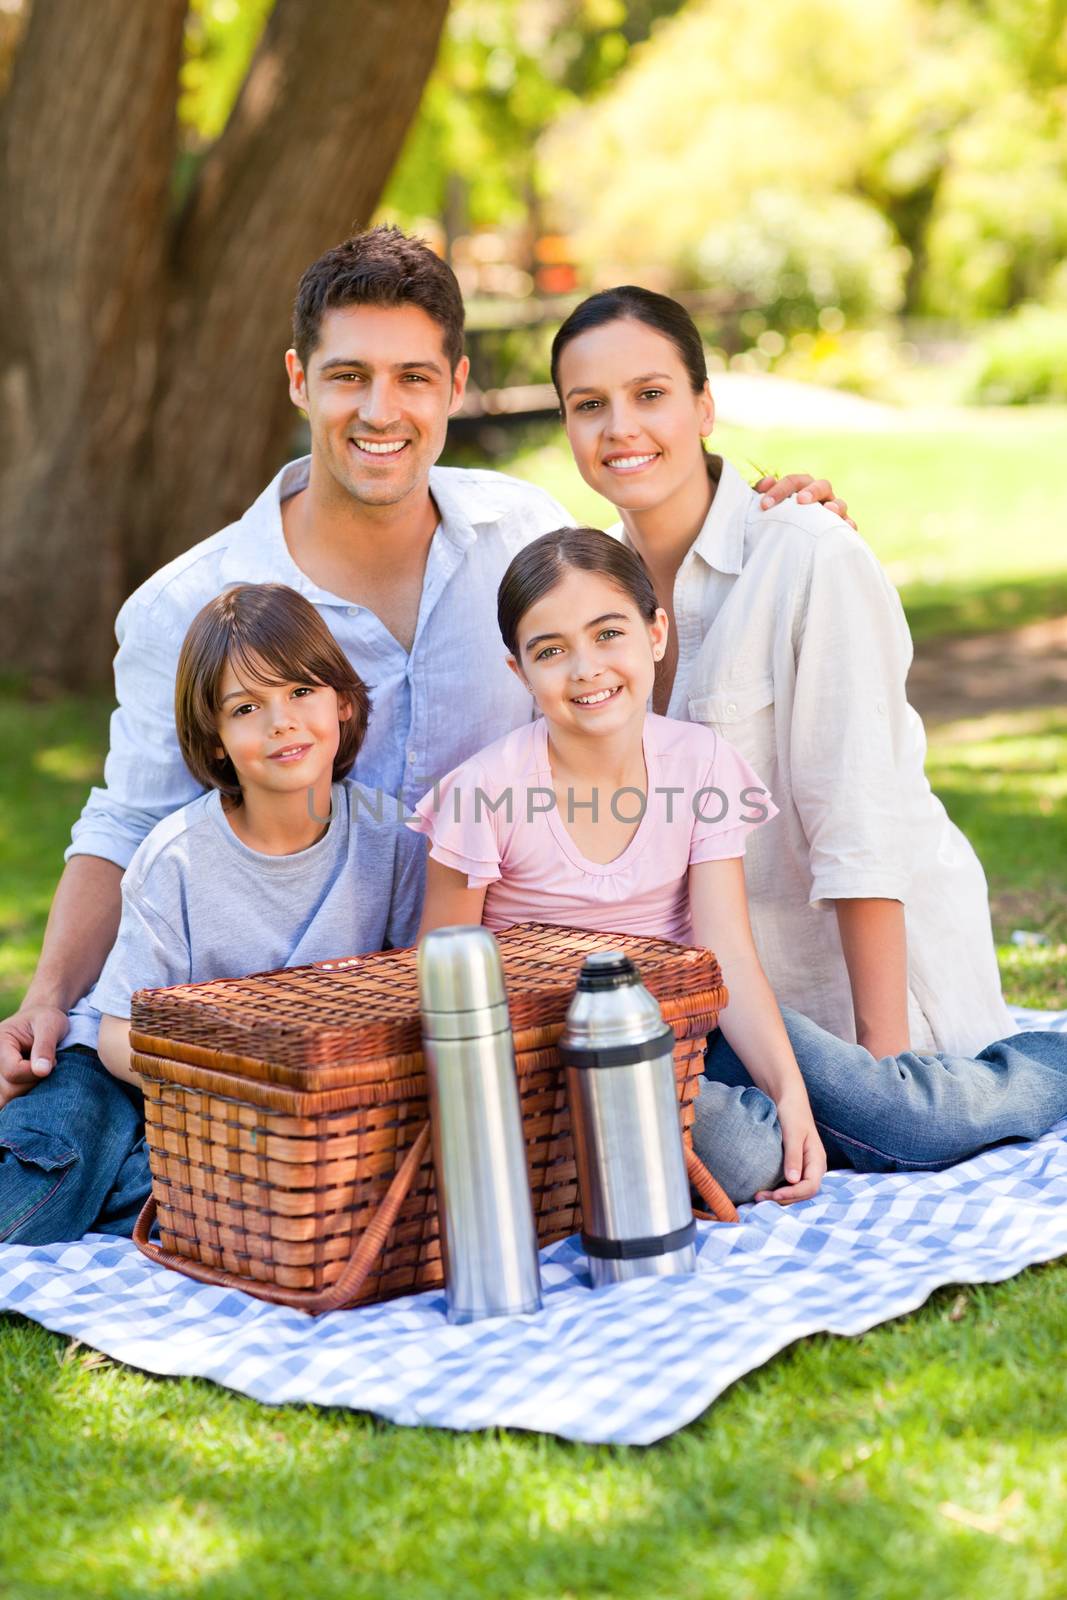 Happy family picnicking in the park during the summer